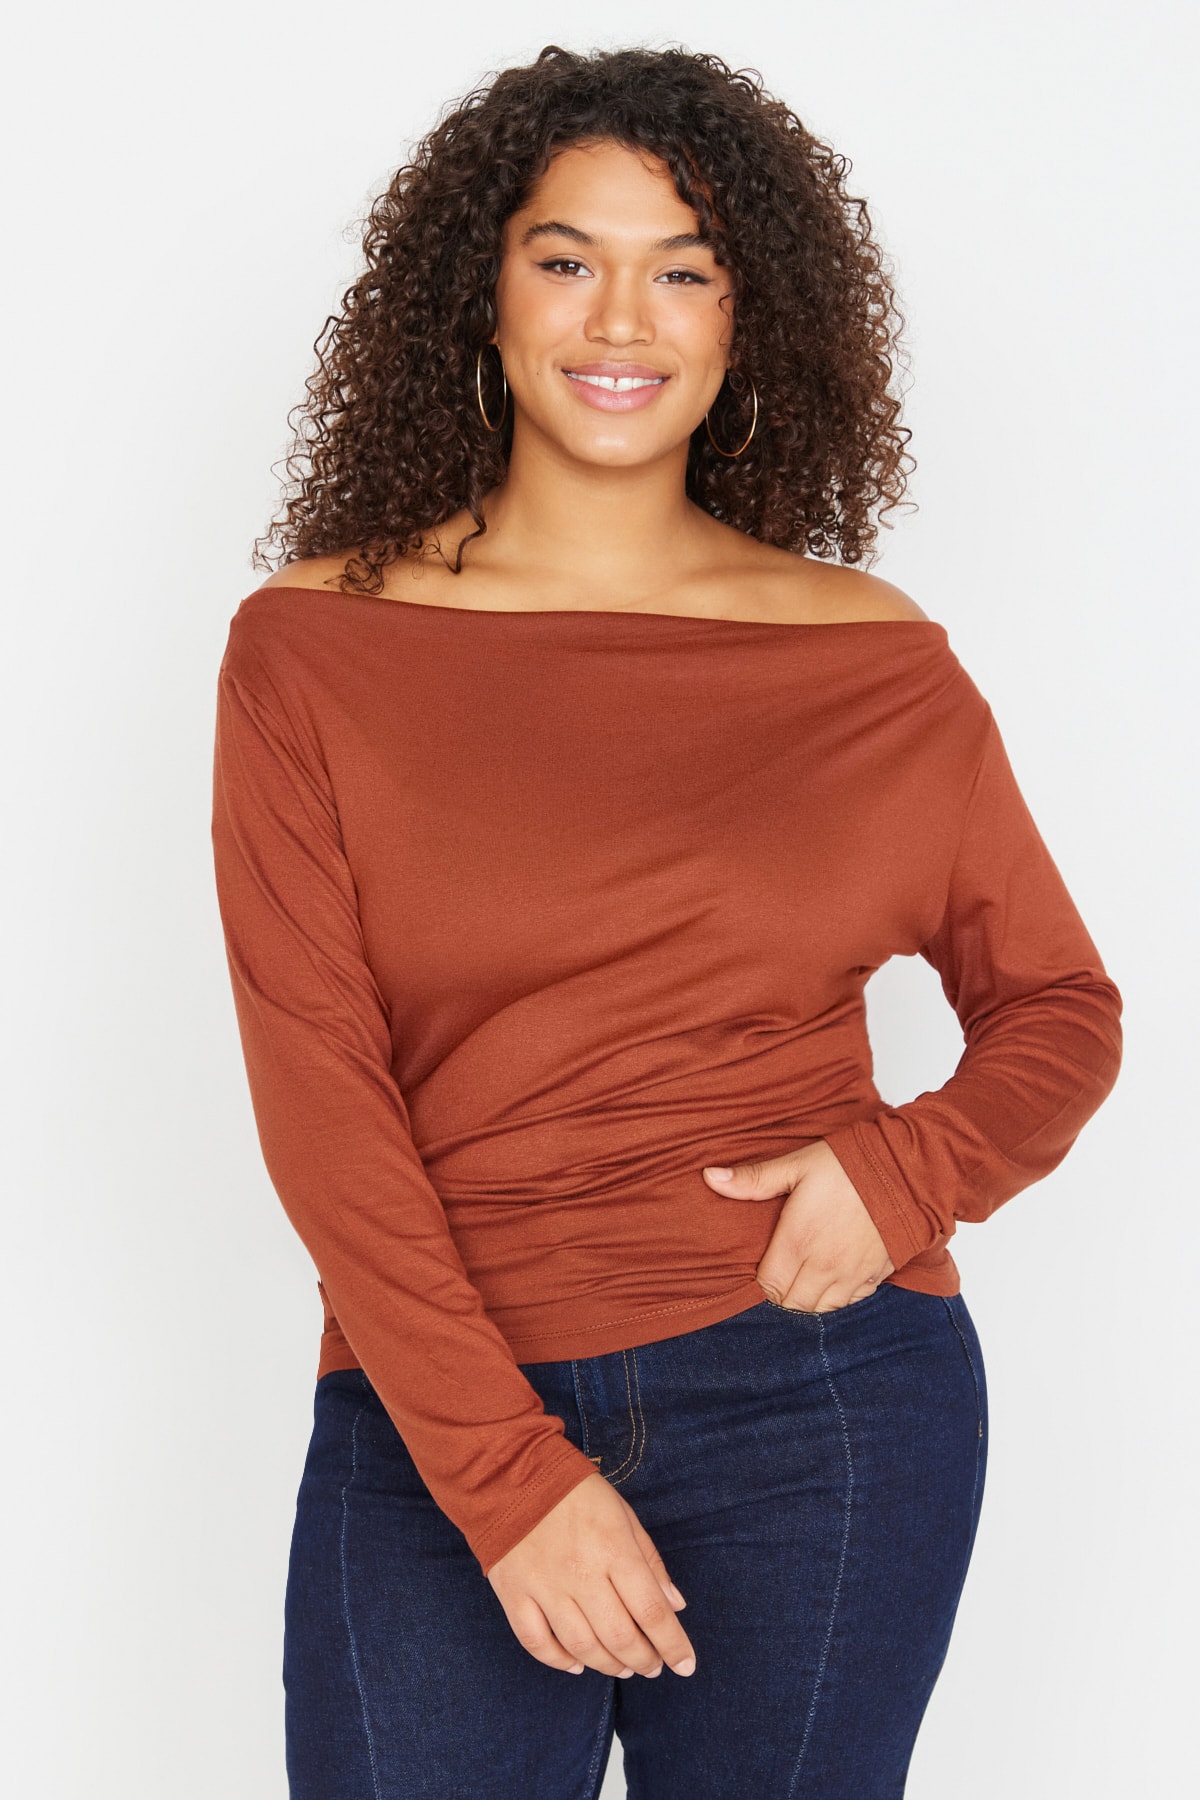 Trendyol Curve Brown Knitted Blouse